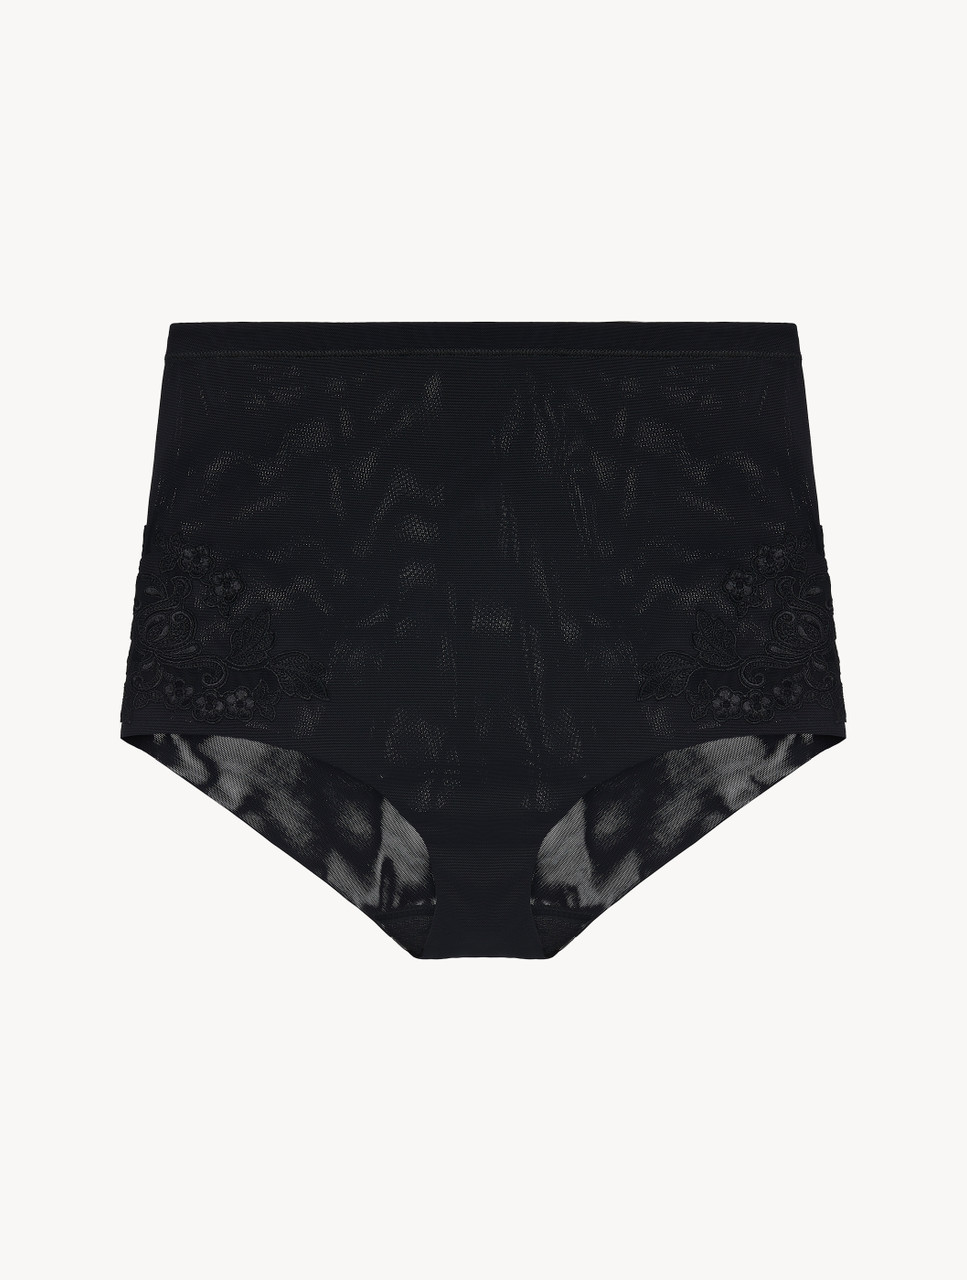 High-waisted Briefs in black stretch tulle